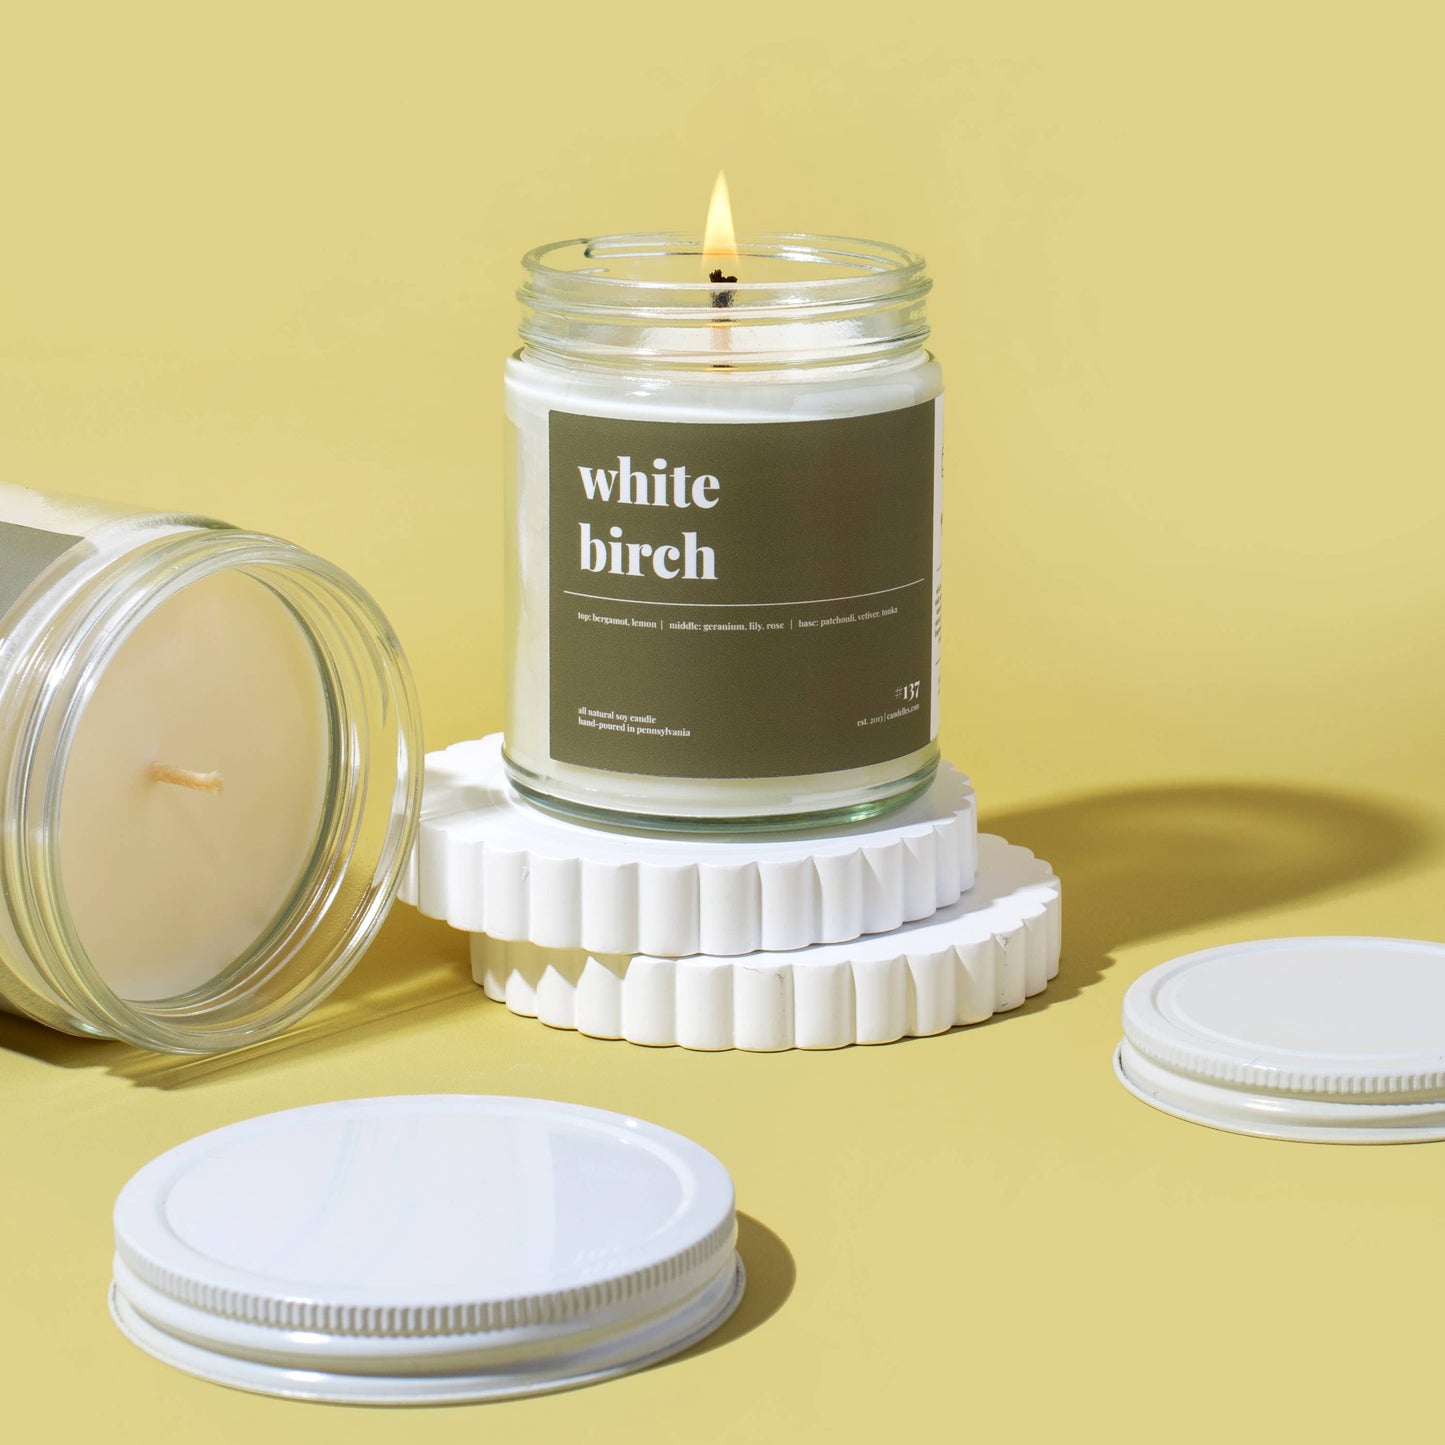 White Birch Scented Soy Candle - 9oz